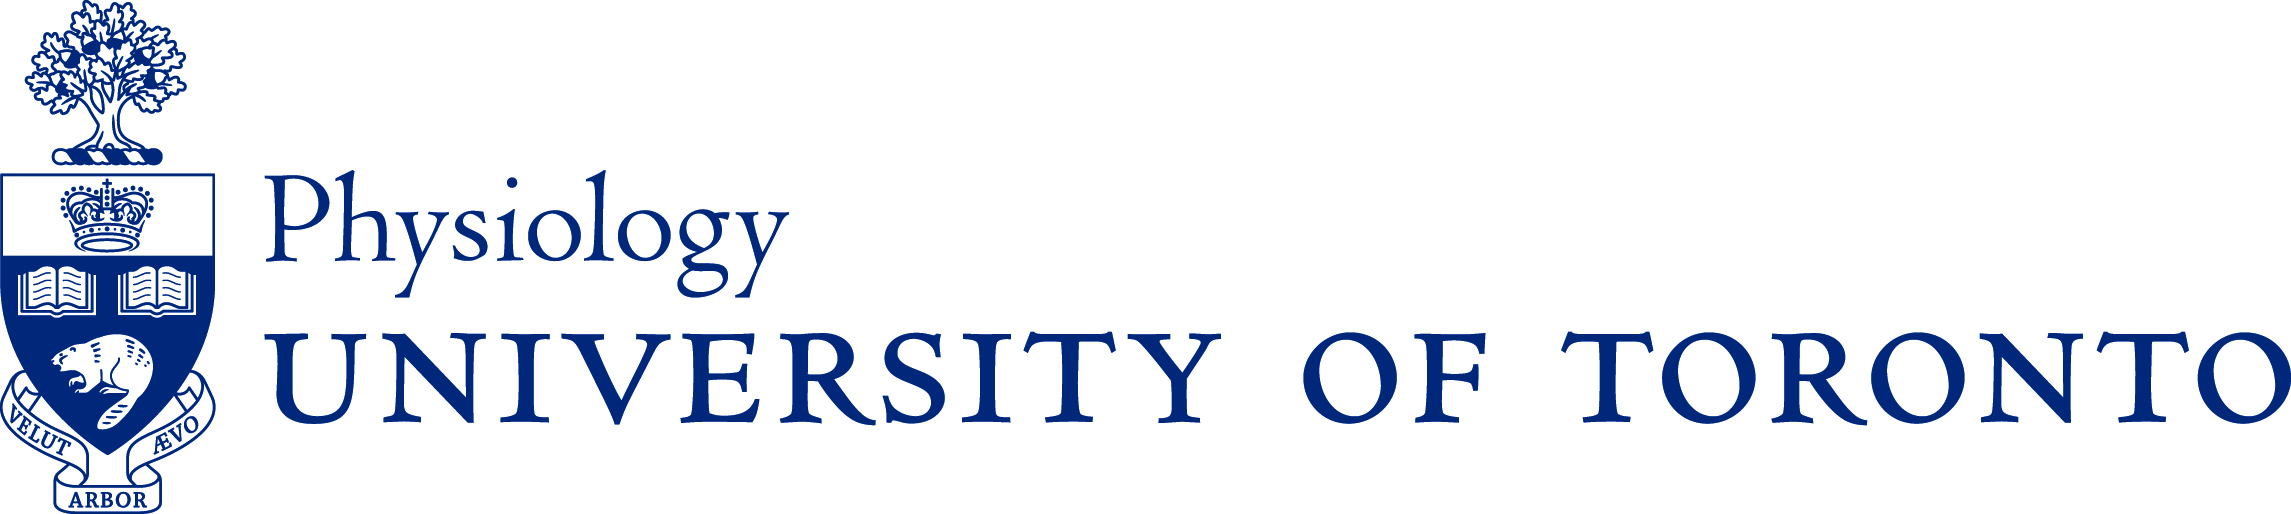 Department of Physiology Logo